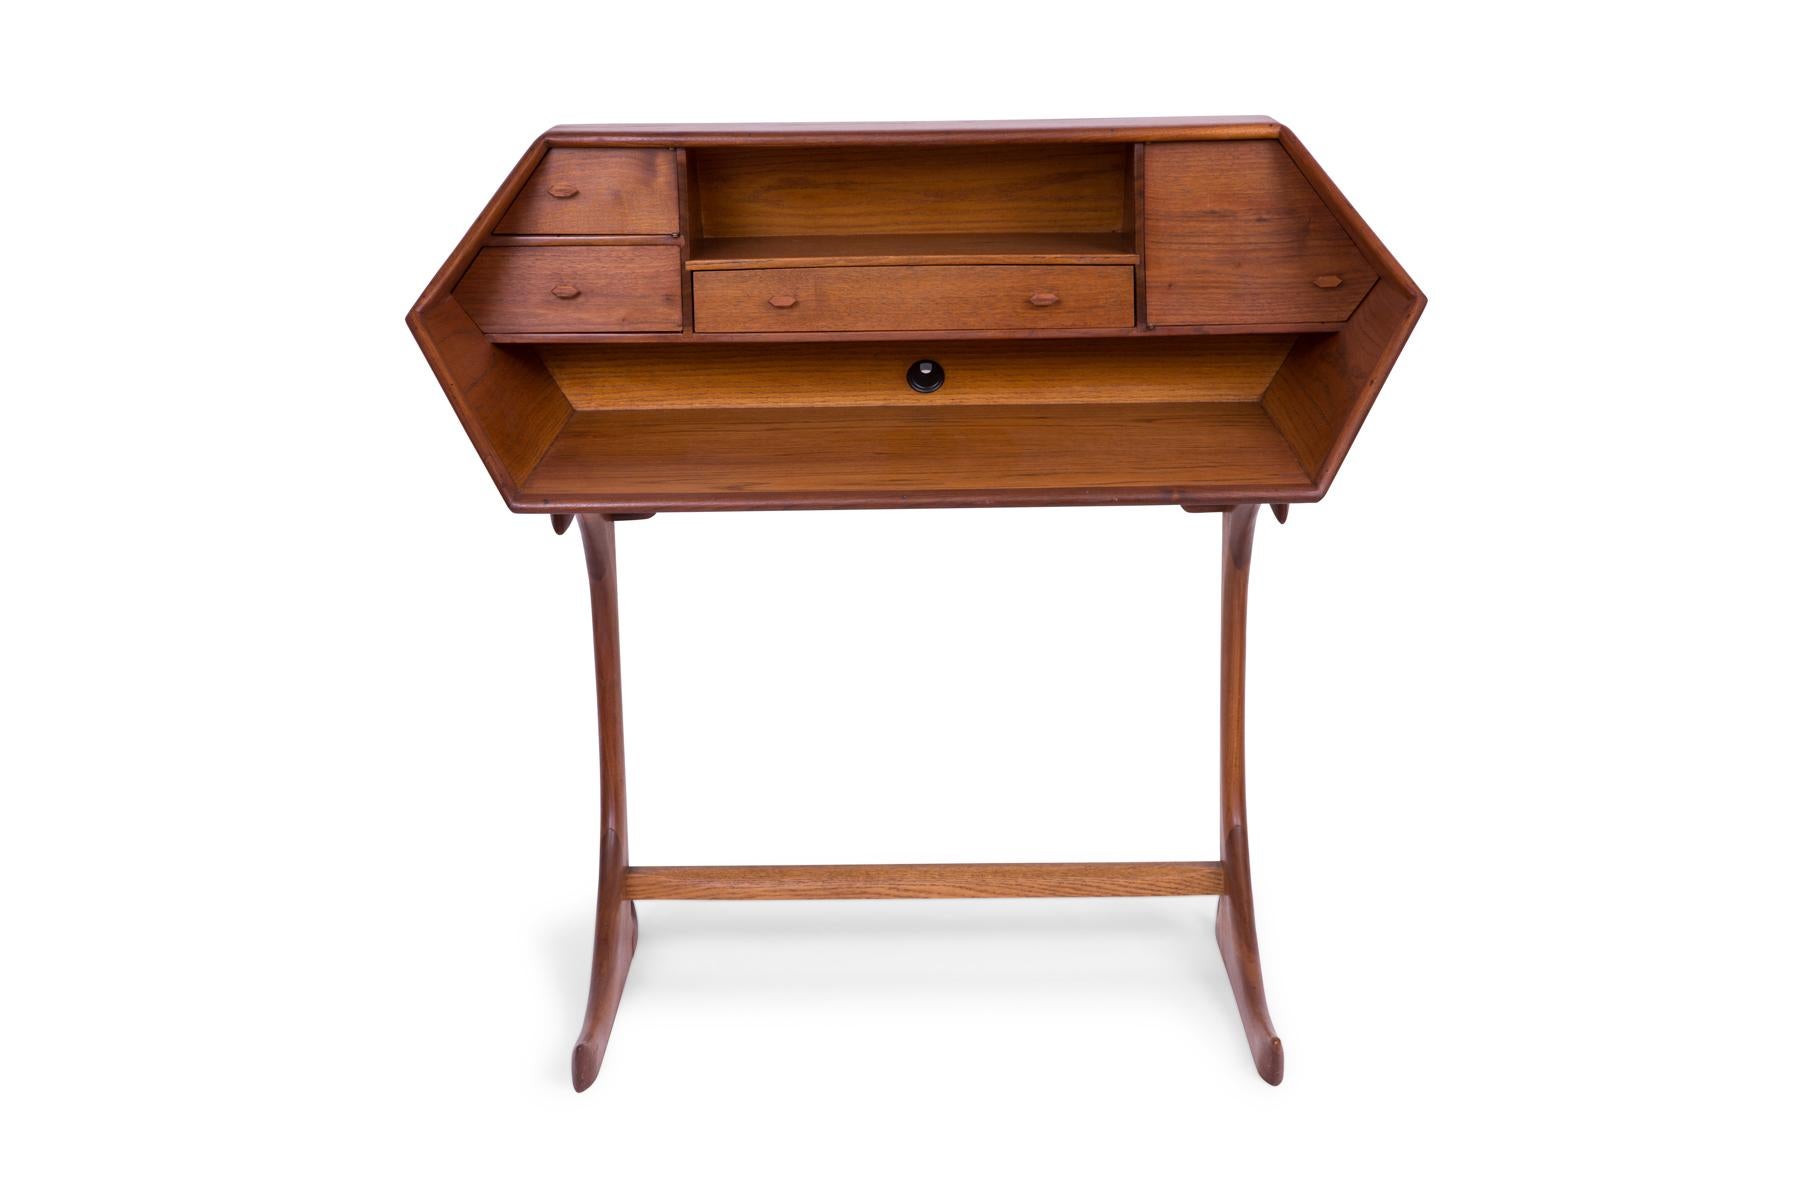 Studio crafted walnut and oak desk circa late 1960s. This sculptural example incorporates stunning form with incredible ease of function. The wood grain is striking, and each drawer and surface masterfully crafted.